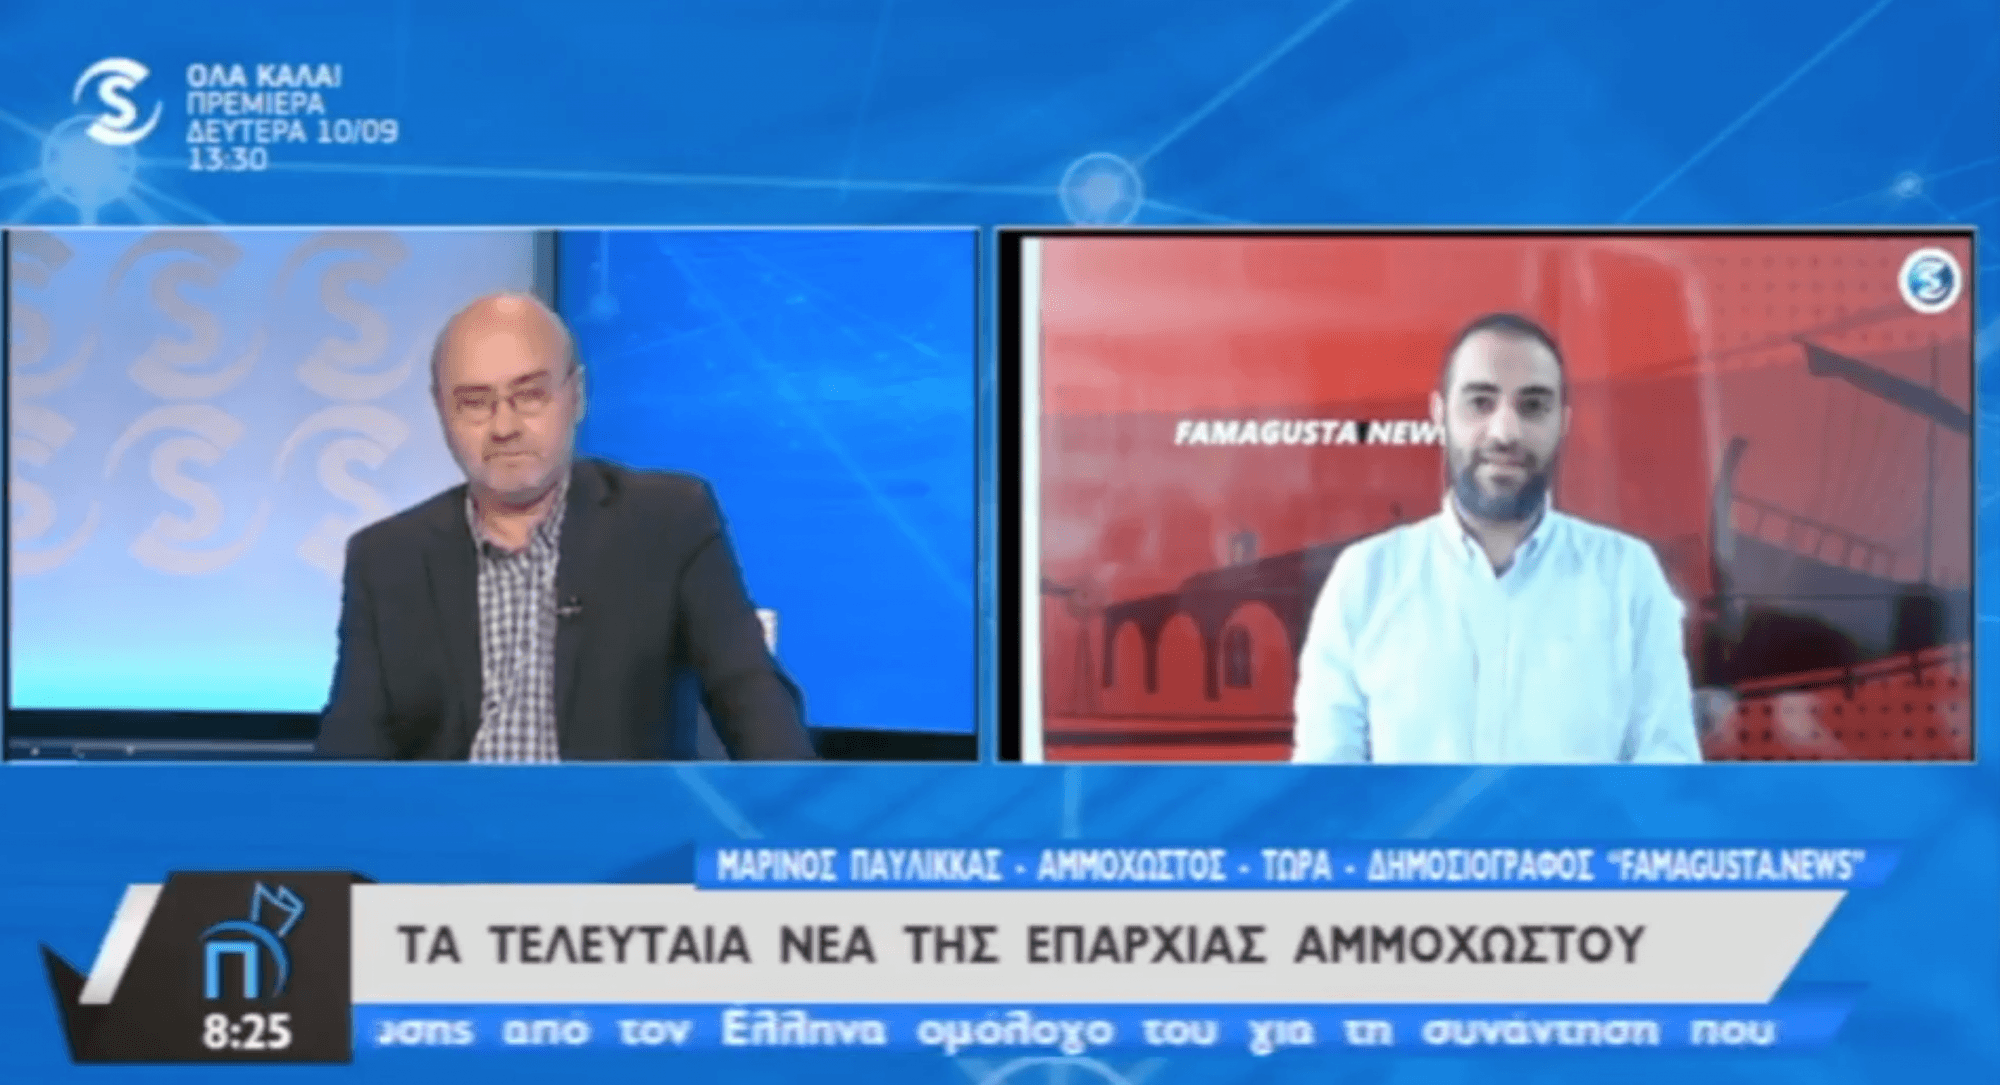 Snapshot 2018 09 10 15.14.45 Famagusta.News, FamagustaNews, SIGMA TV, Famagusta News, Front Page